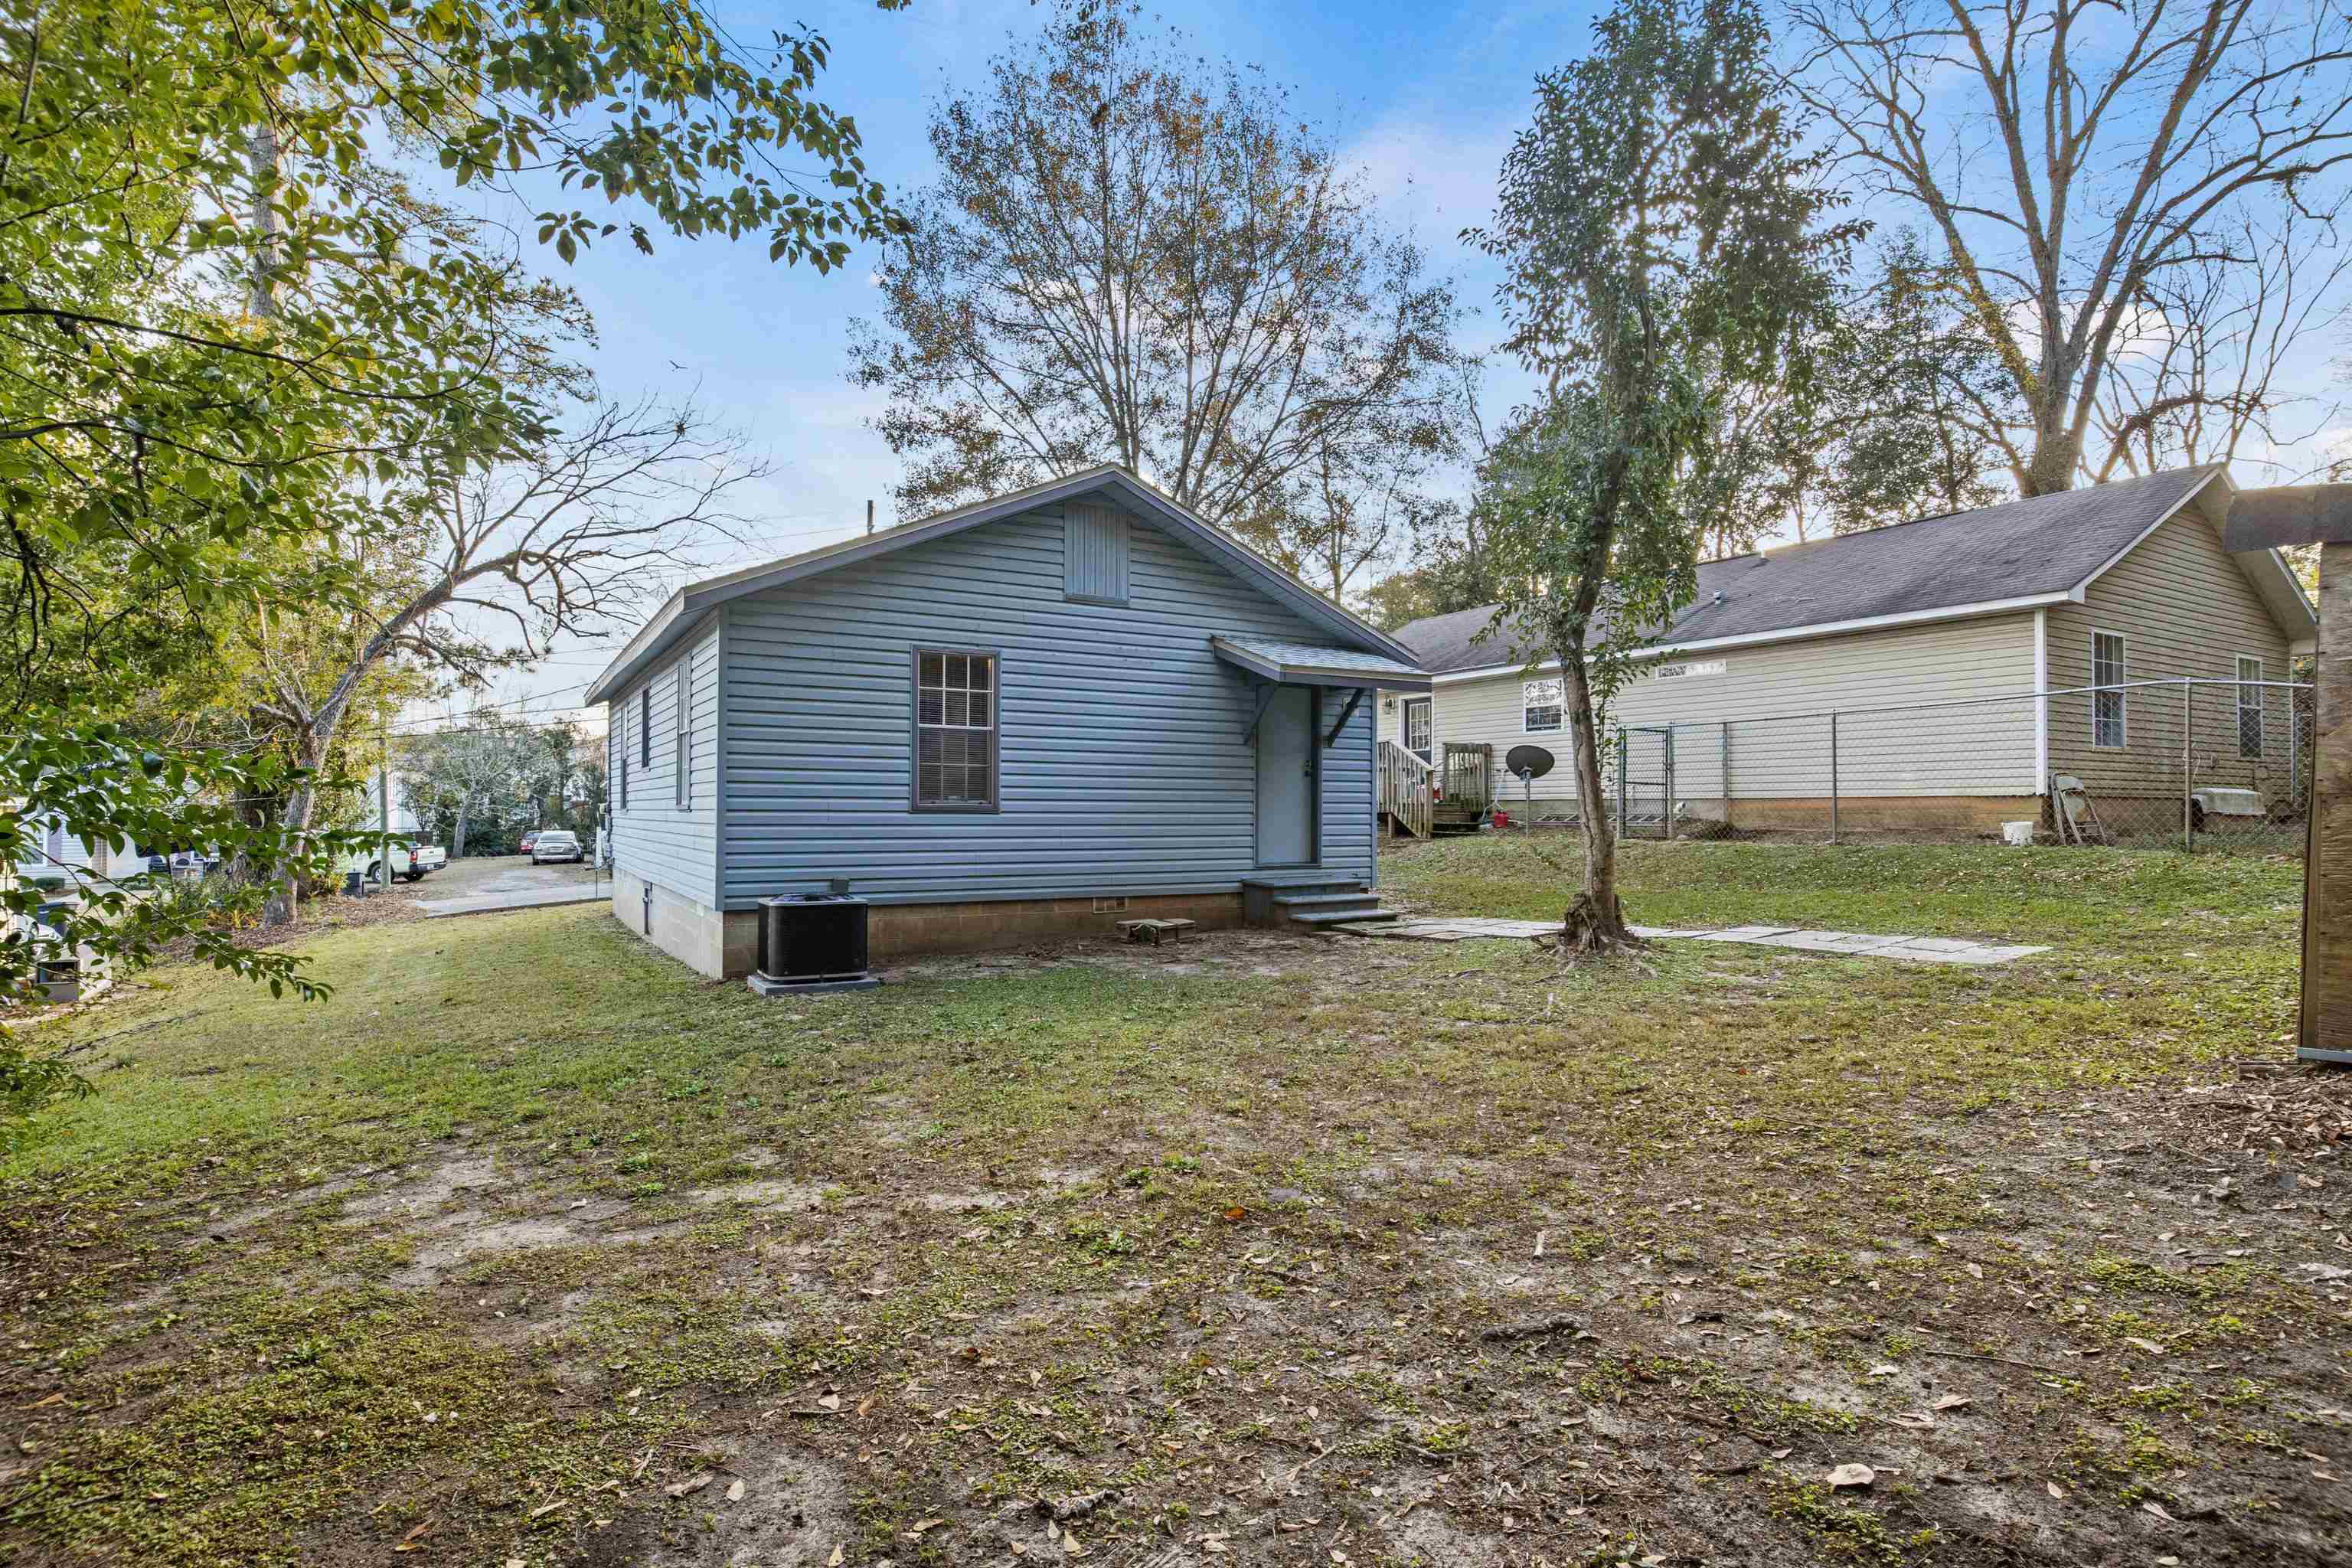 1010 Volusia Street,TALLAHASSEE,Florida 32304,2 Bedrooms Bedrooms,1 BathroomBathrooms,Detached single family,1010 Volusia Street,367658